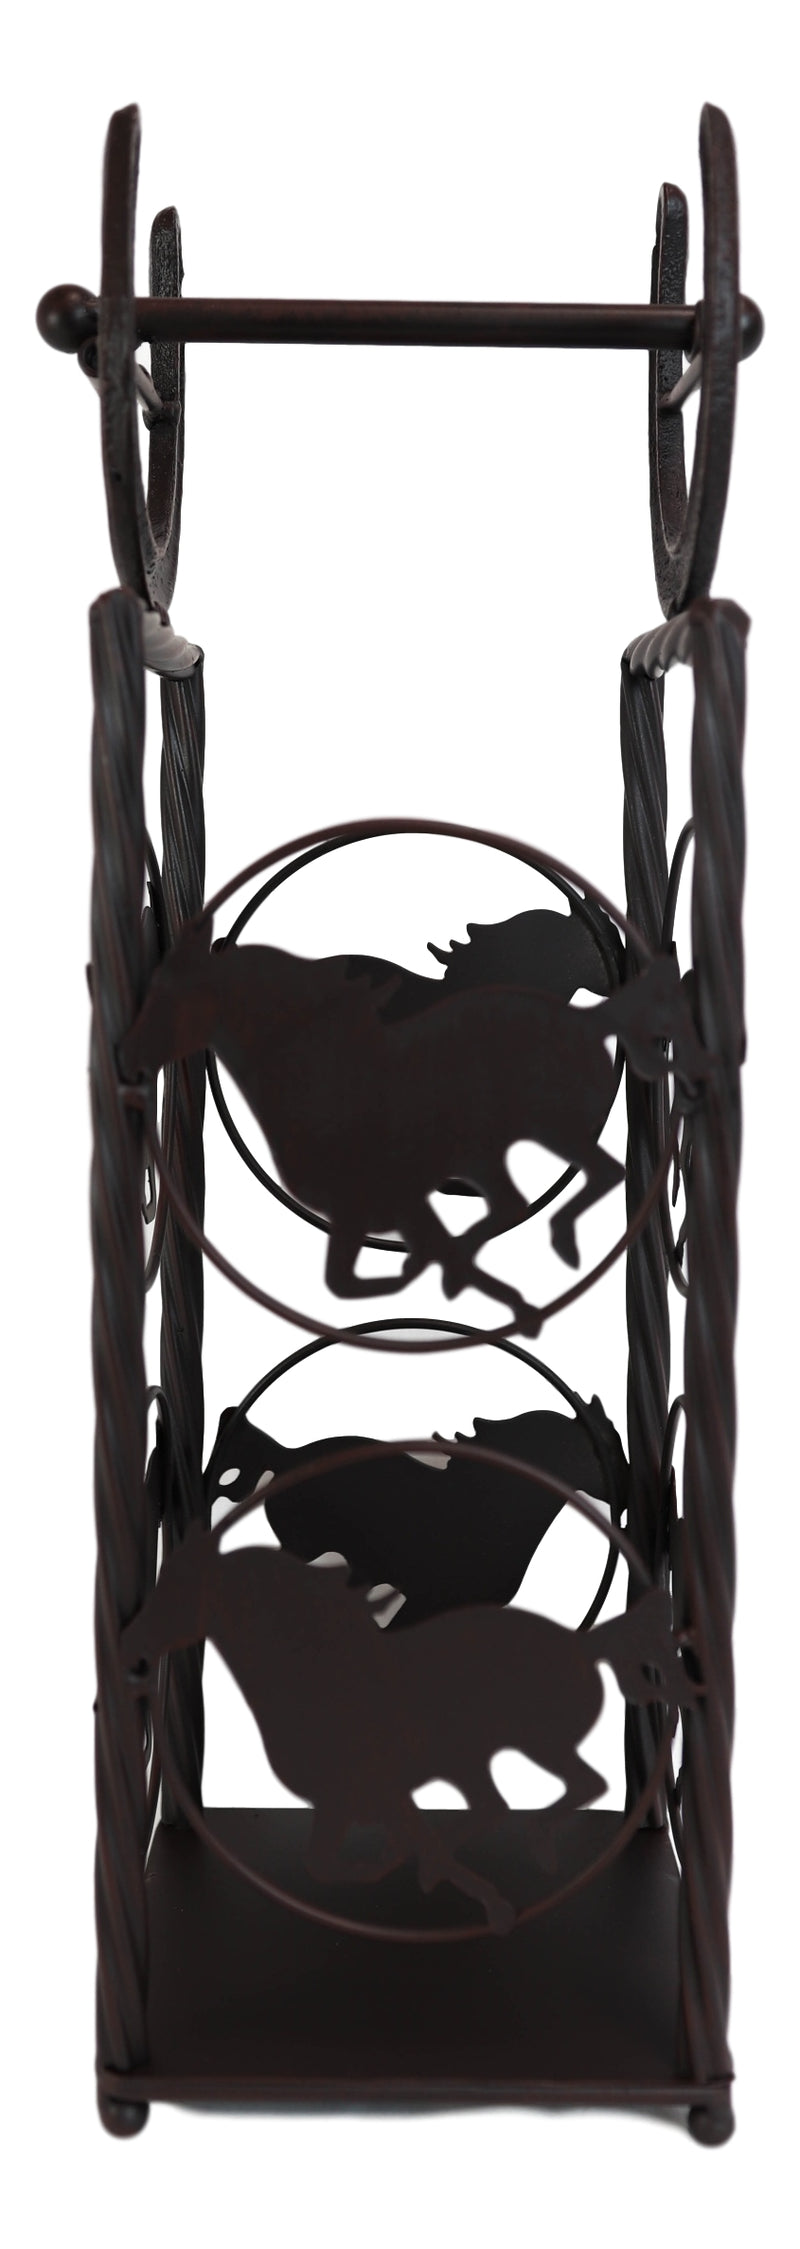 Cast Iron Western Rustic Horse And Horseshoes Toilet Paper Holder Stand Station